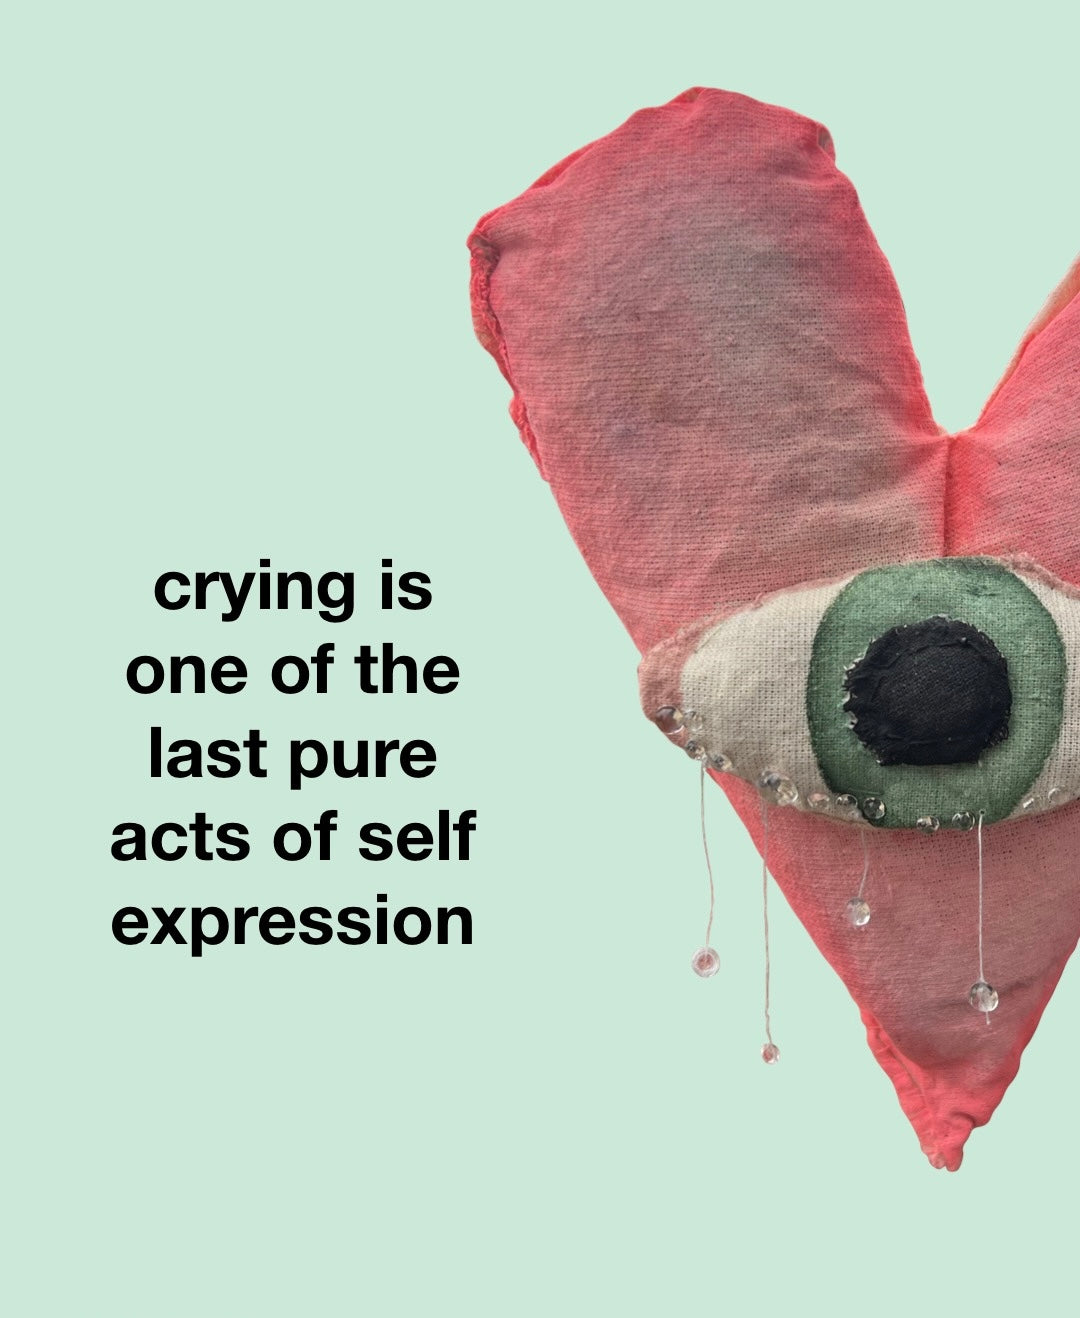 ‘REASONS TO CRY’